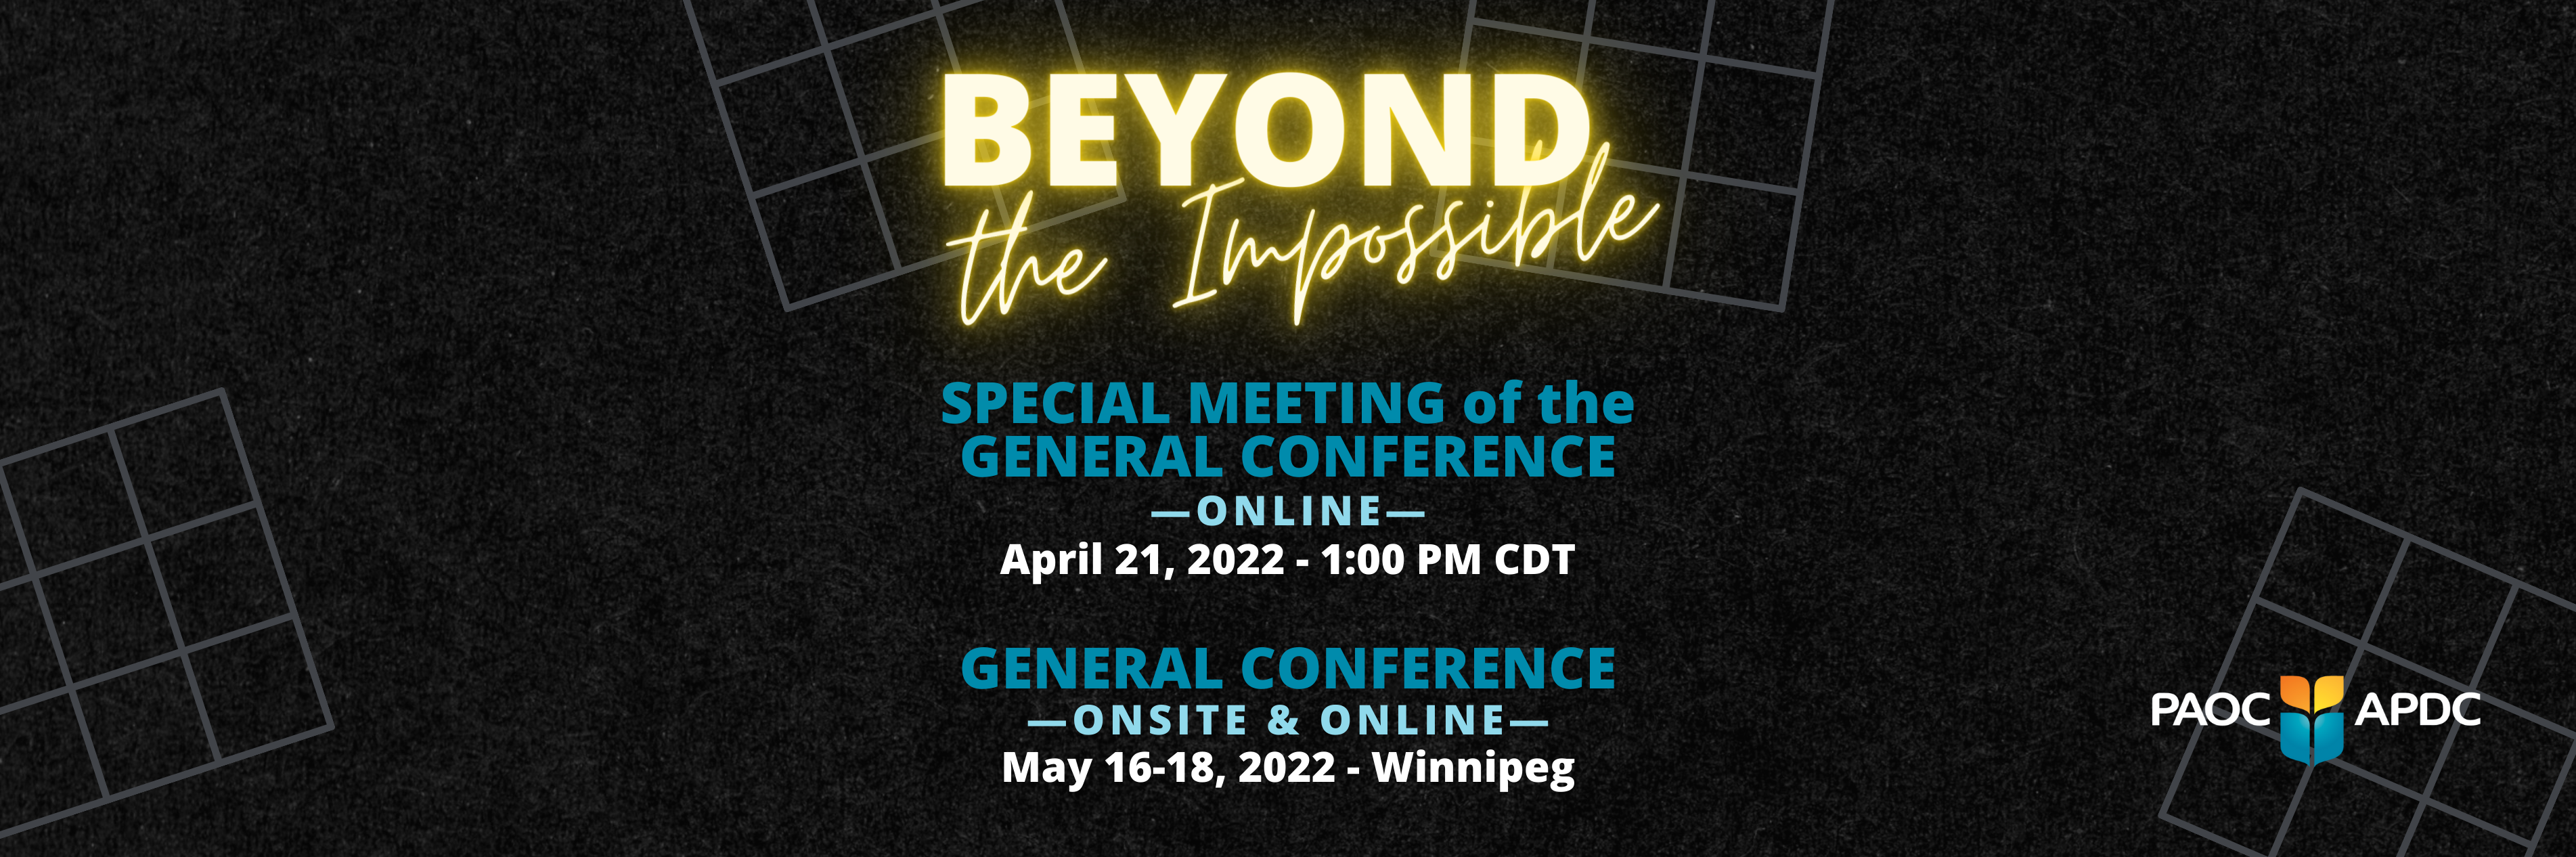 Beyond the Impossible GENERAL CONFERENCE Calvary Temple, Winnipeg, May 16-29, 2022